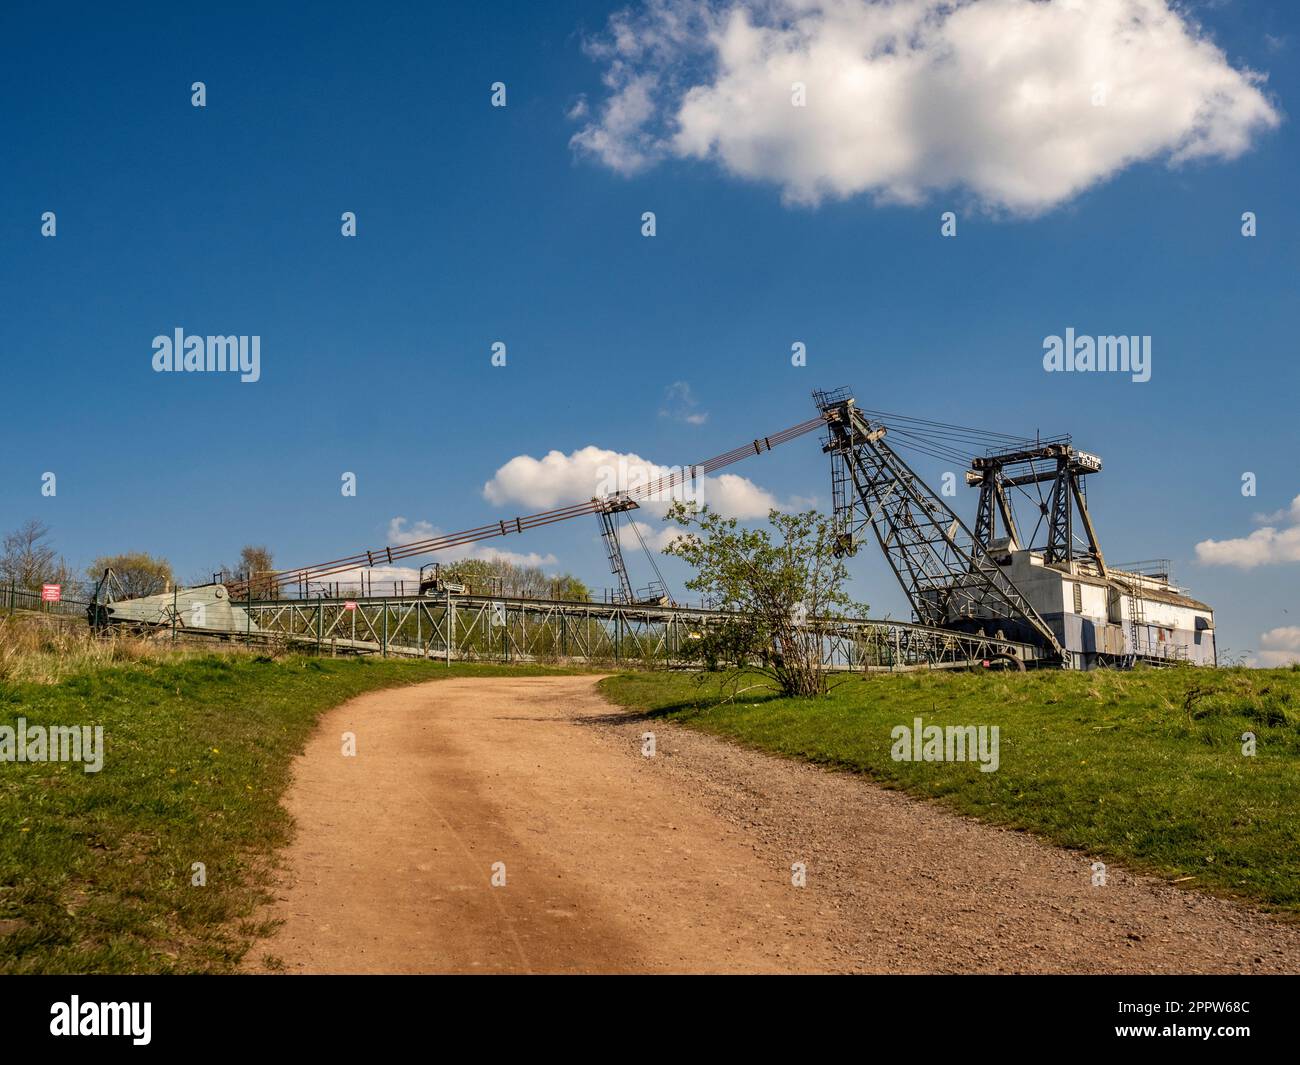 Bucyrus Erie BE 1150 Walking Dragline Excavator, known as “Oddball” at St Aidan's Park nature reserve, Swillington. UK Stock Photo